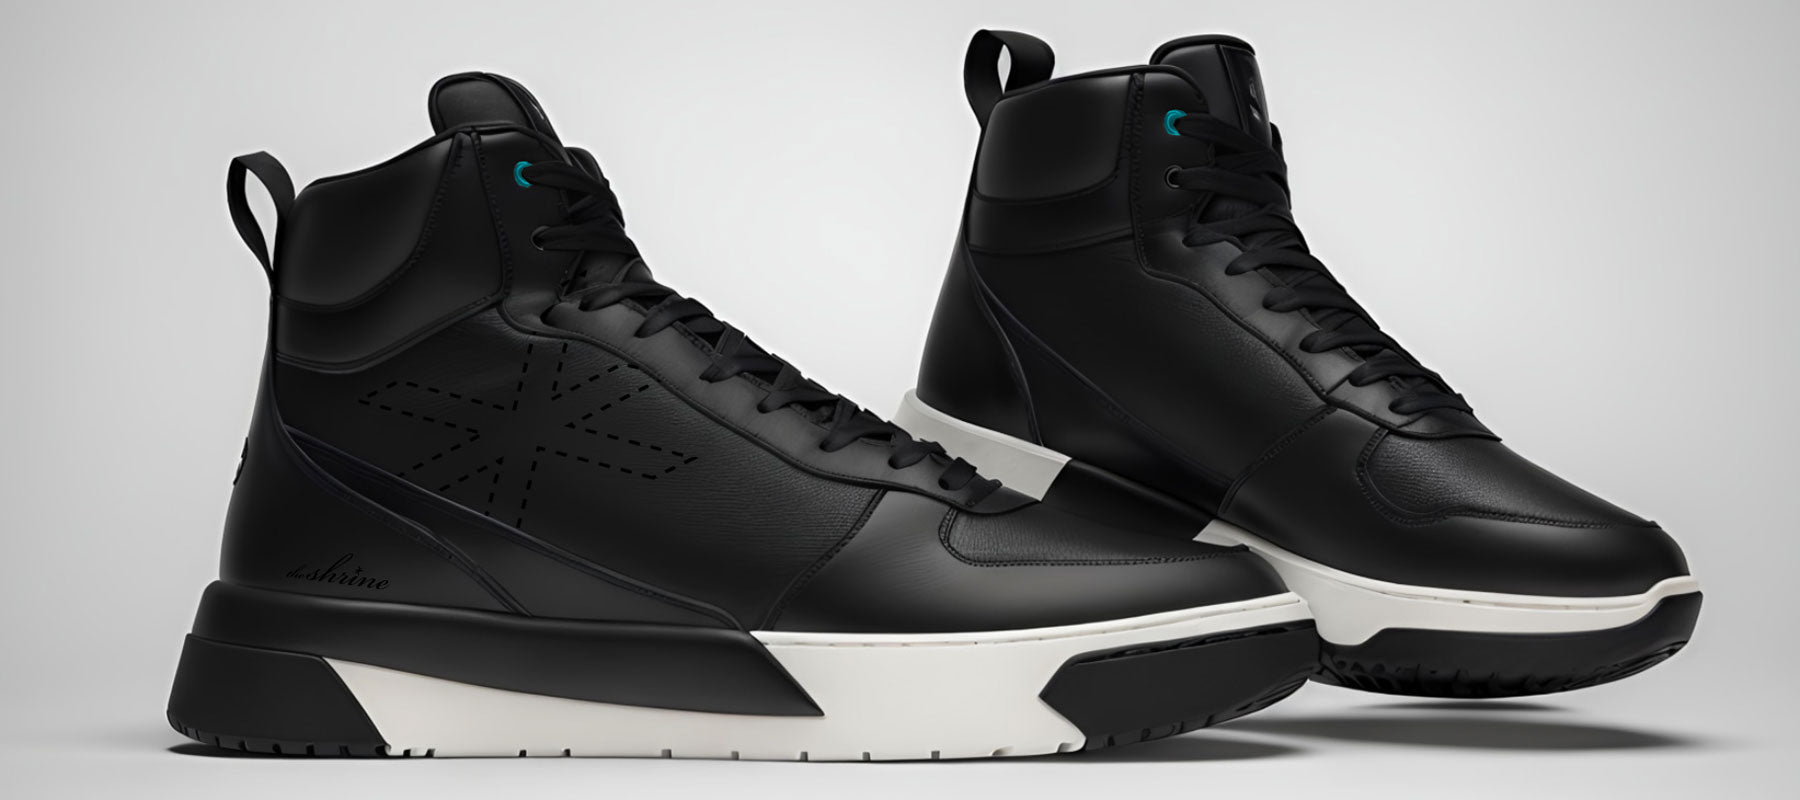 The Shrine Co drops its first sneaker! Black Leather Hi Top